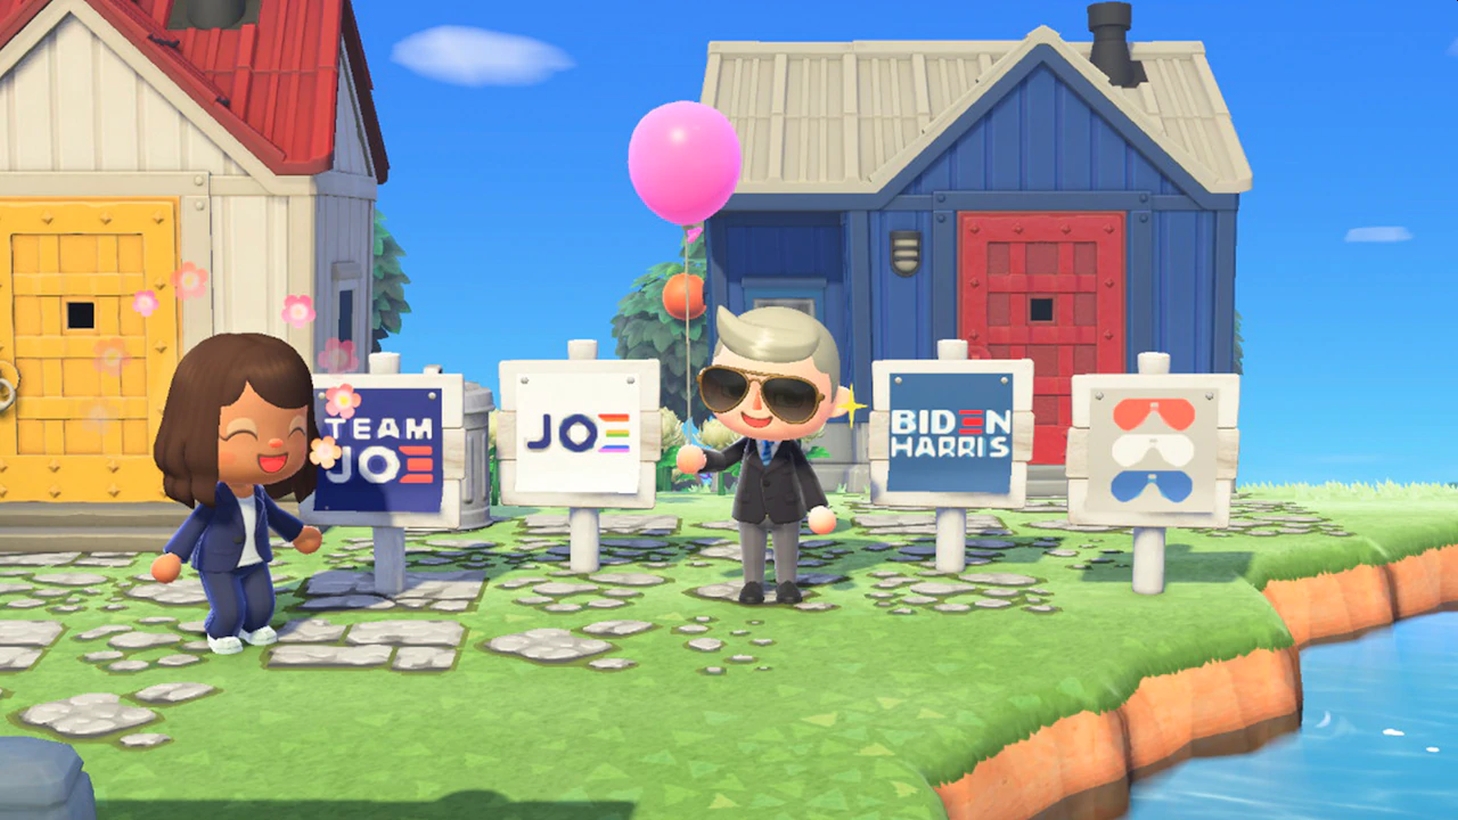 Animal Crossing: New Horizons Asks Organizations To Refrain From Bringing Politics Into The Game